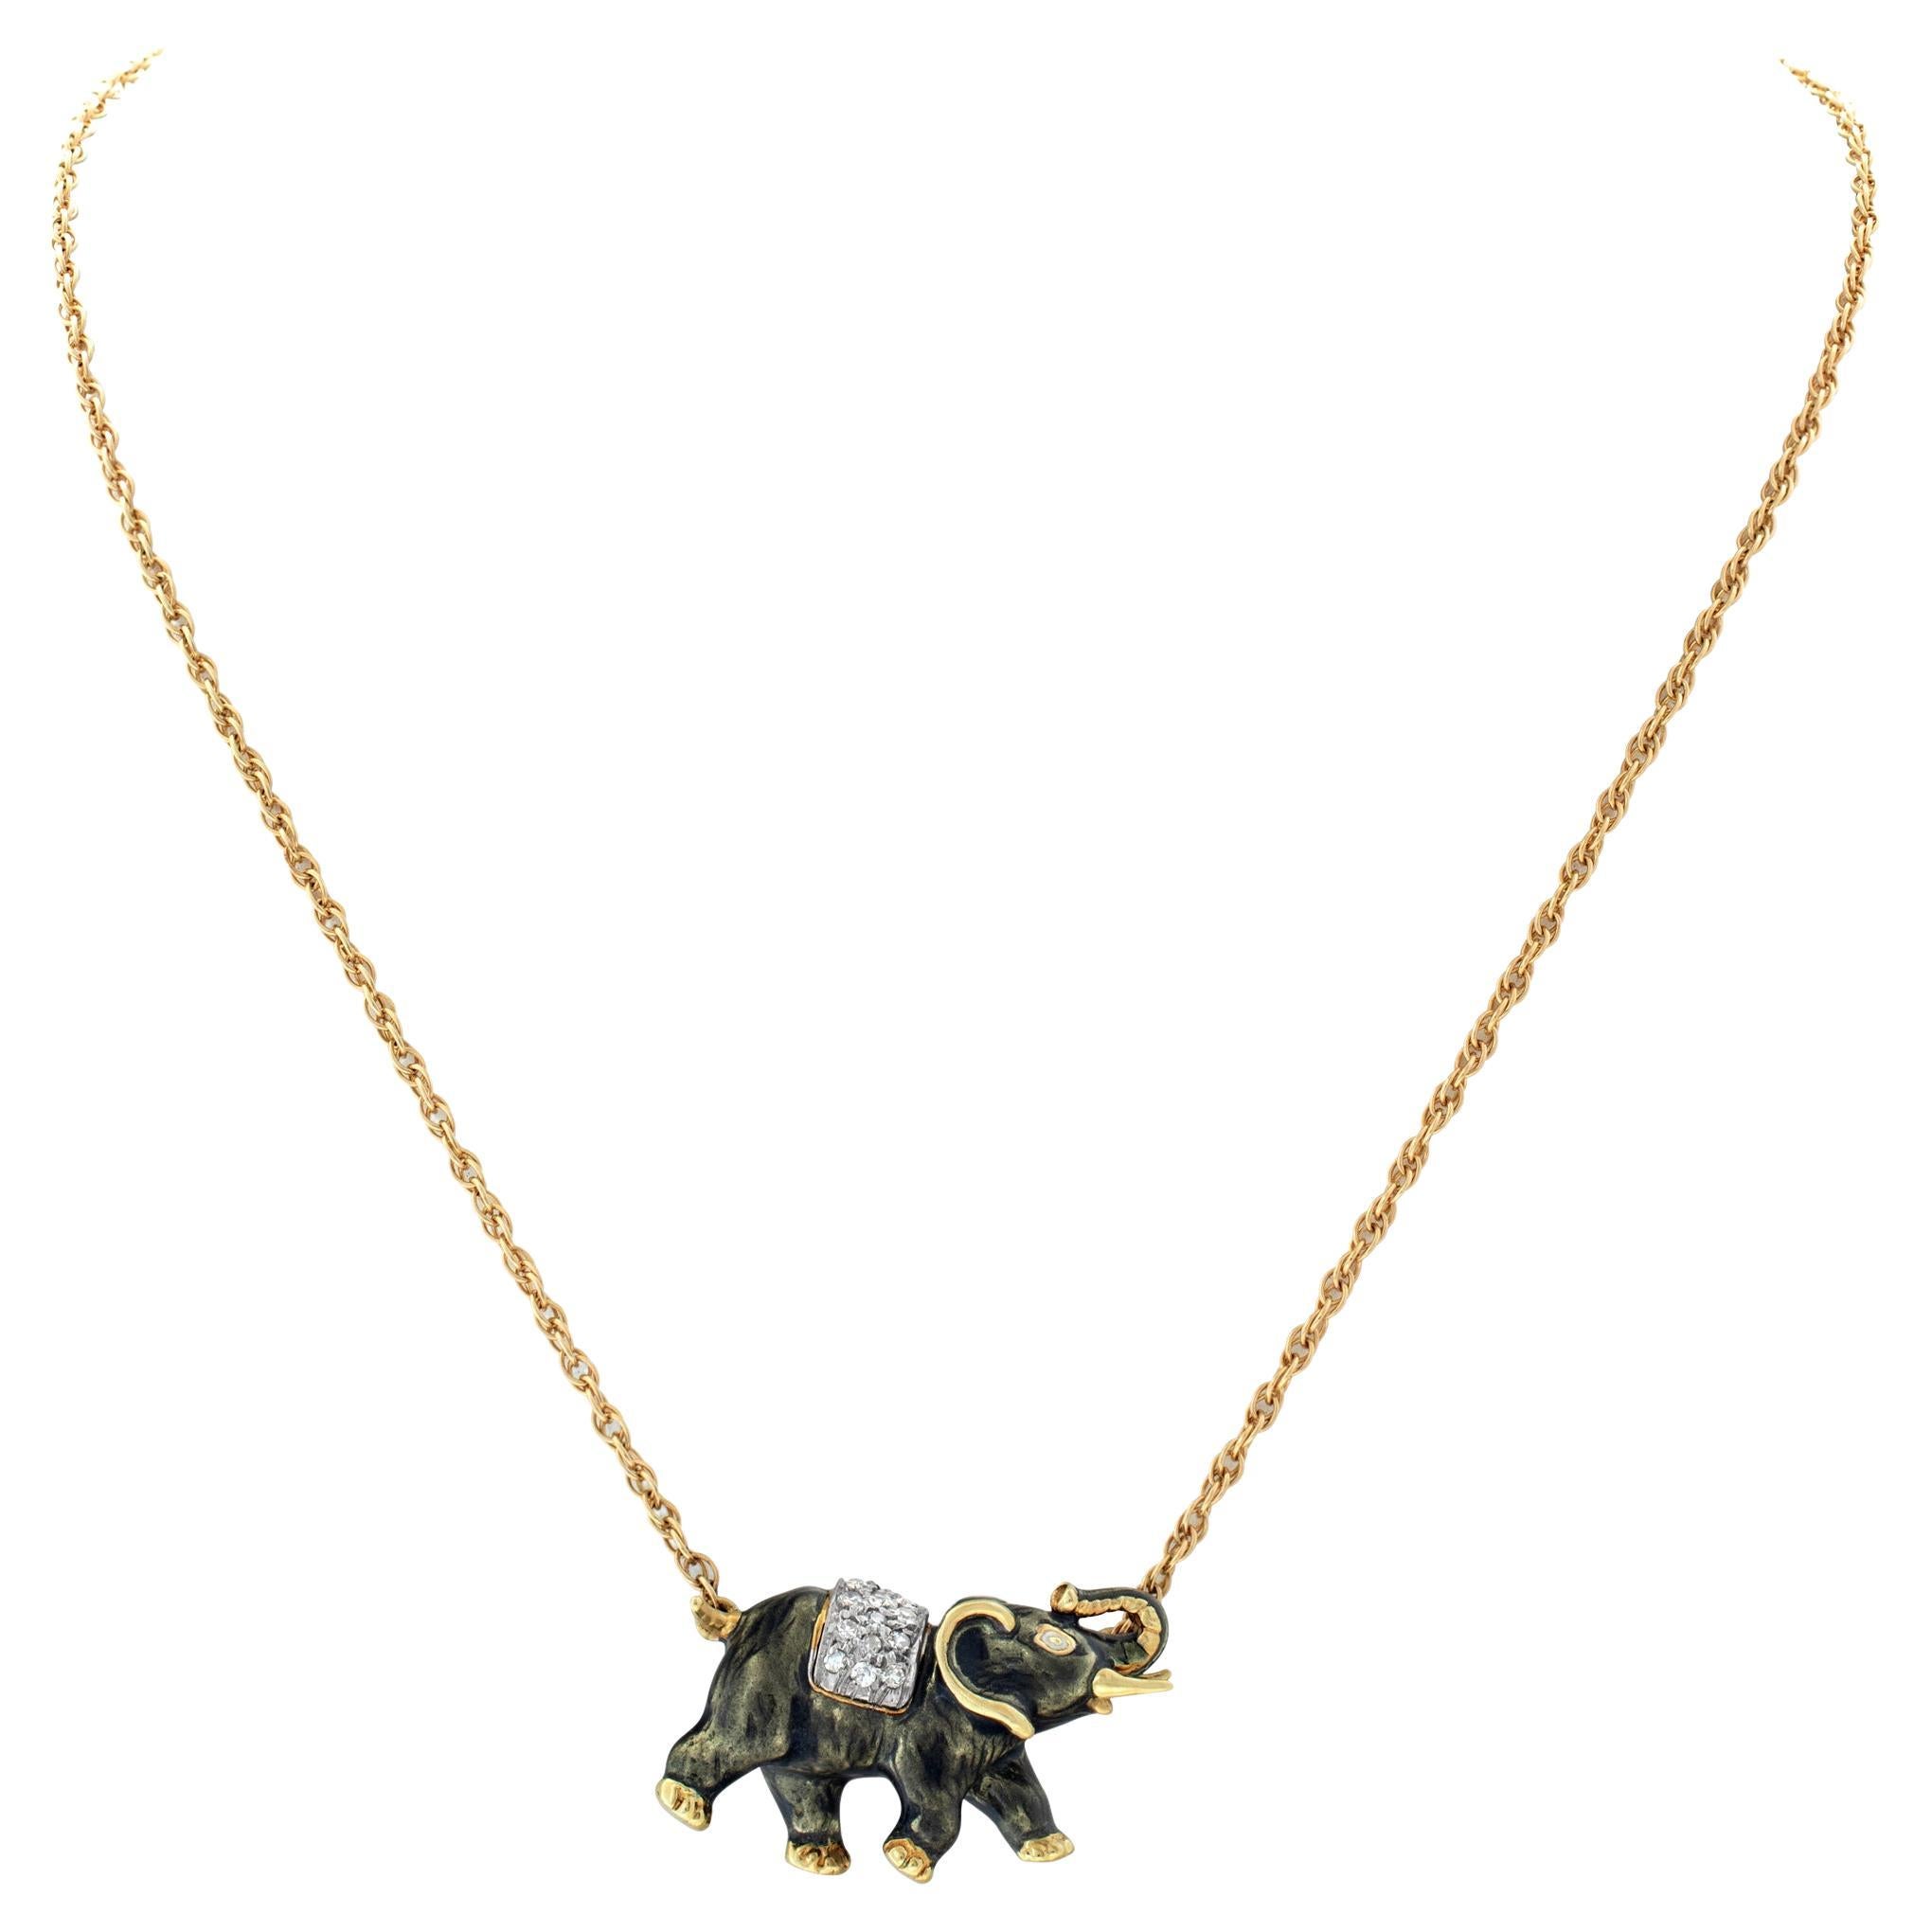 Elephant necklace in 14k gold with 0.25 carats in diamond accents G-H color, For Sale